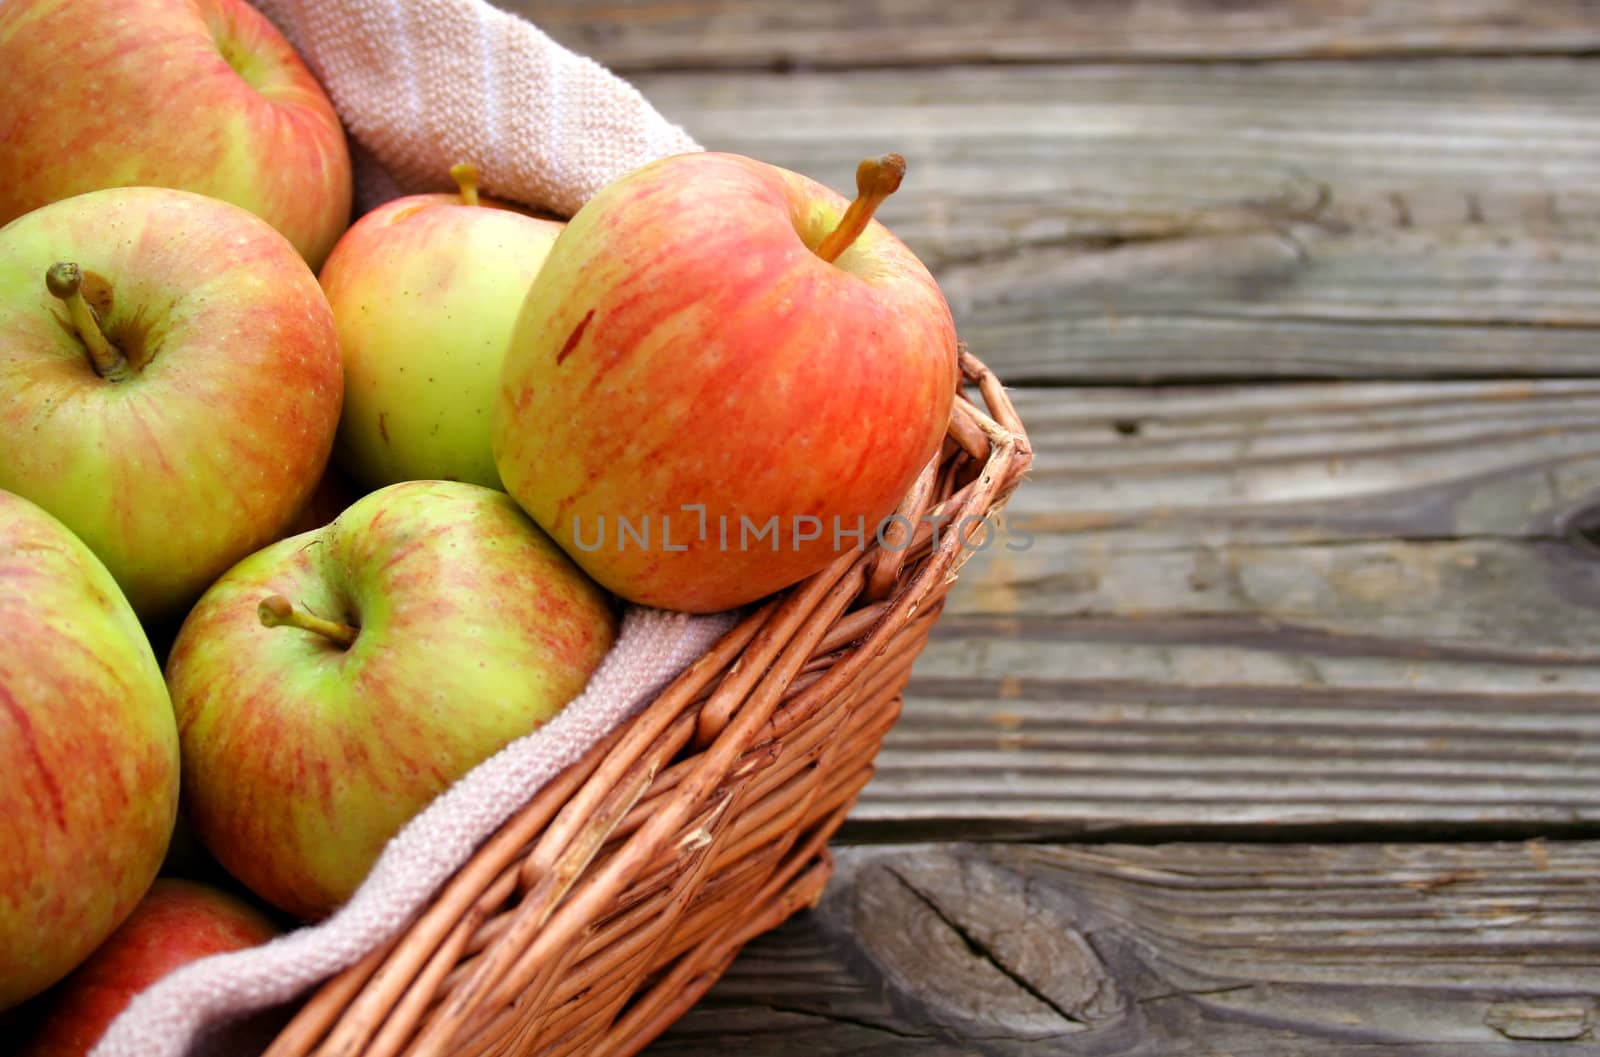 Apples in a basket with wood texture background.